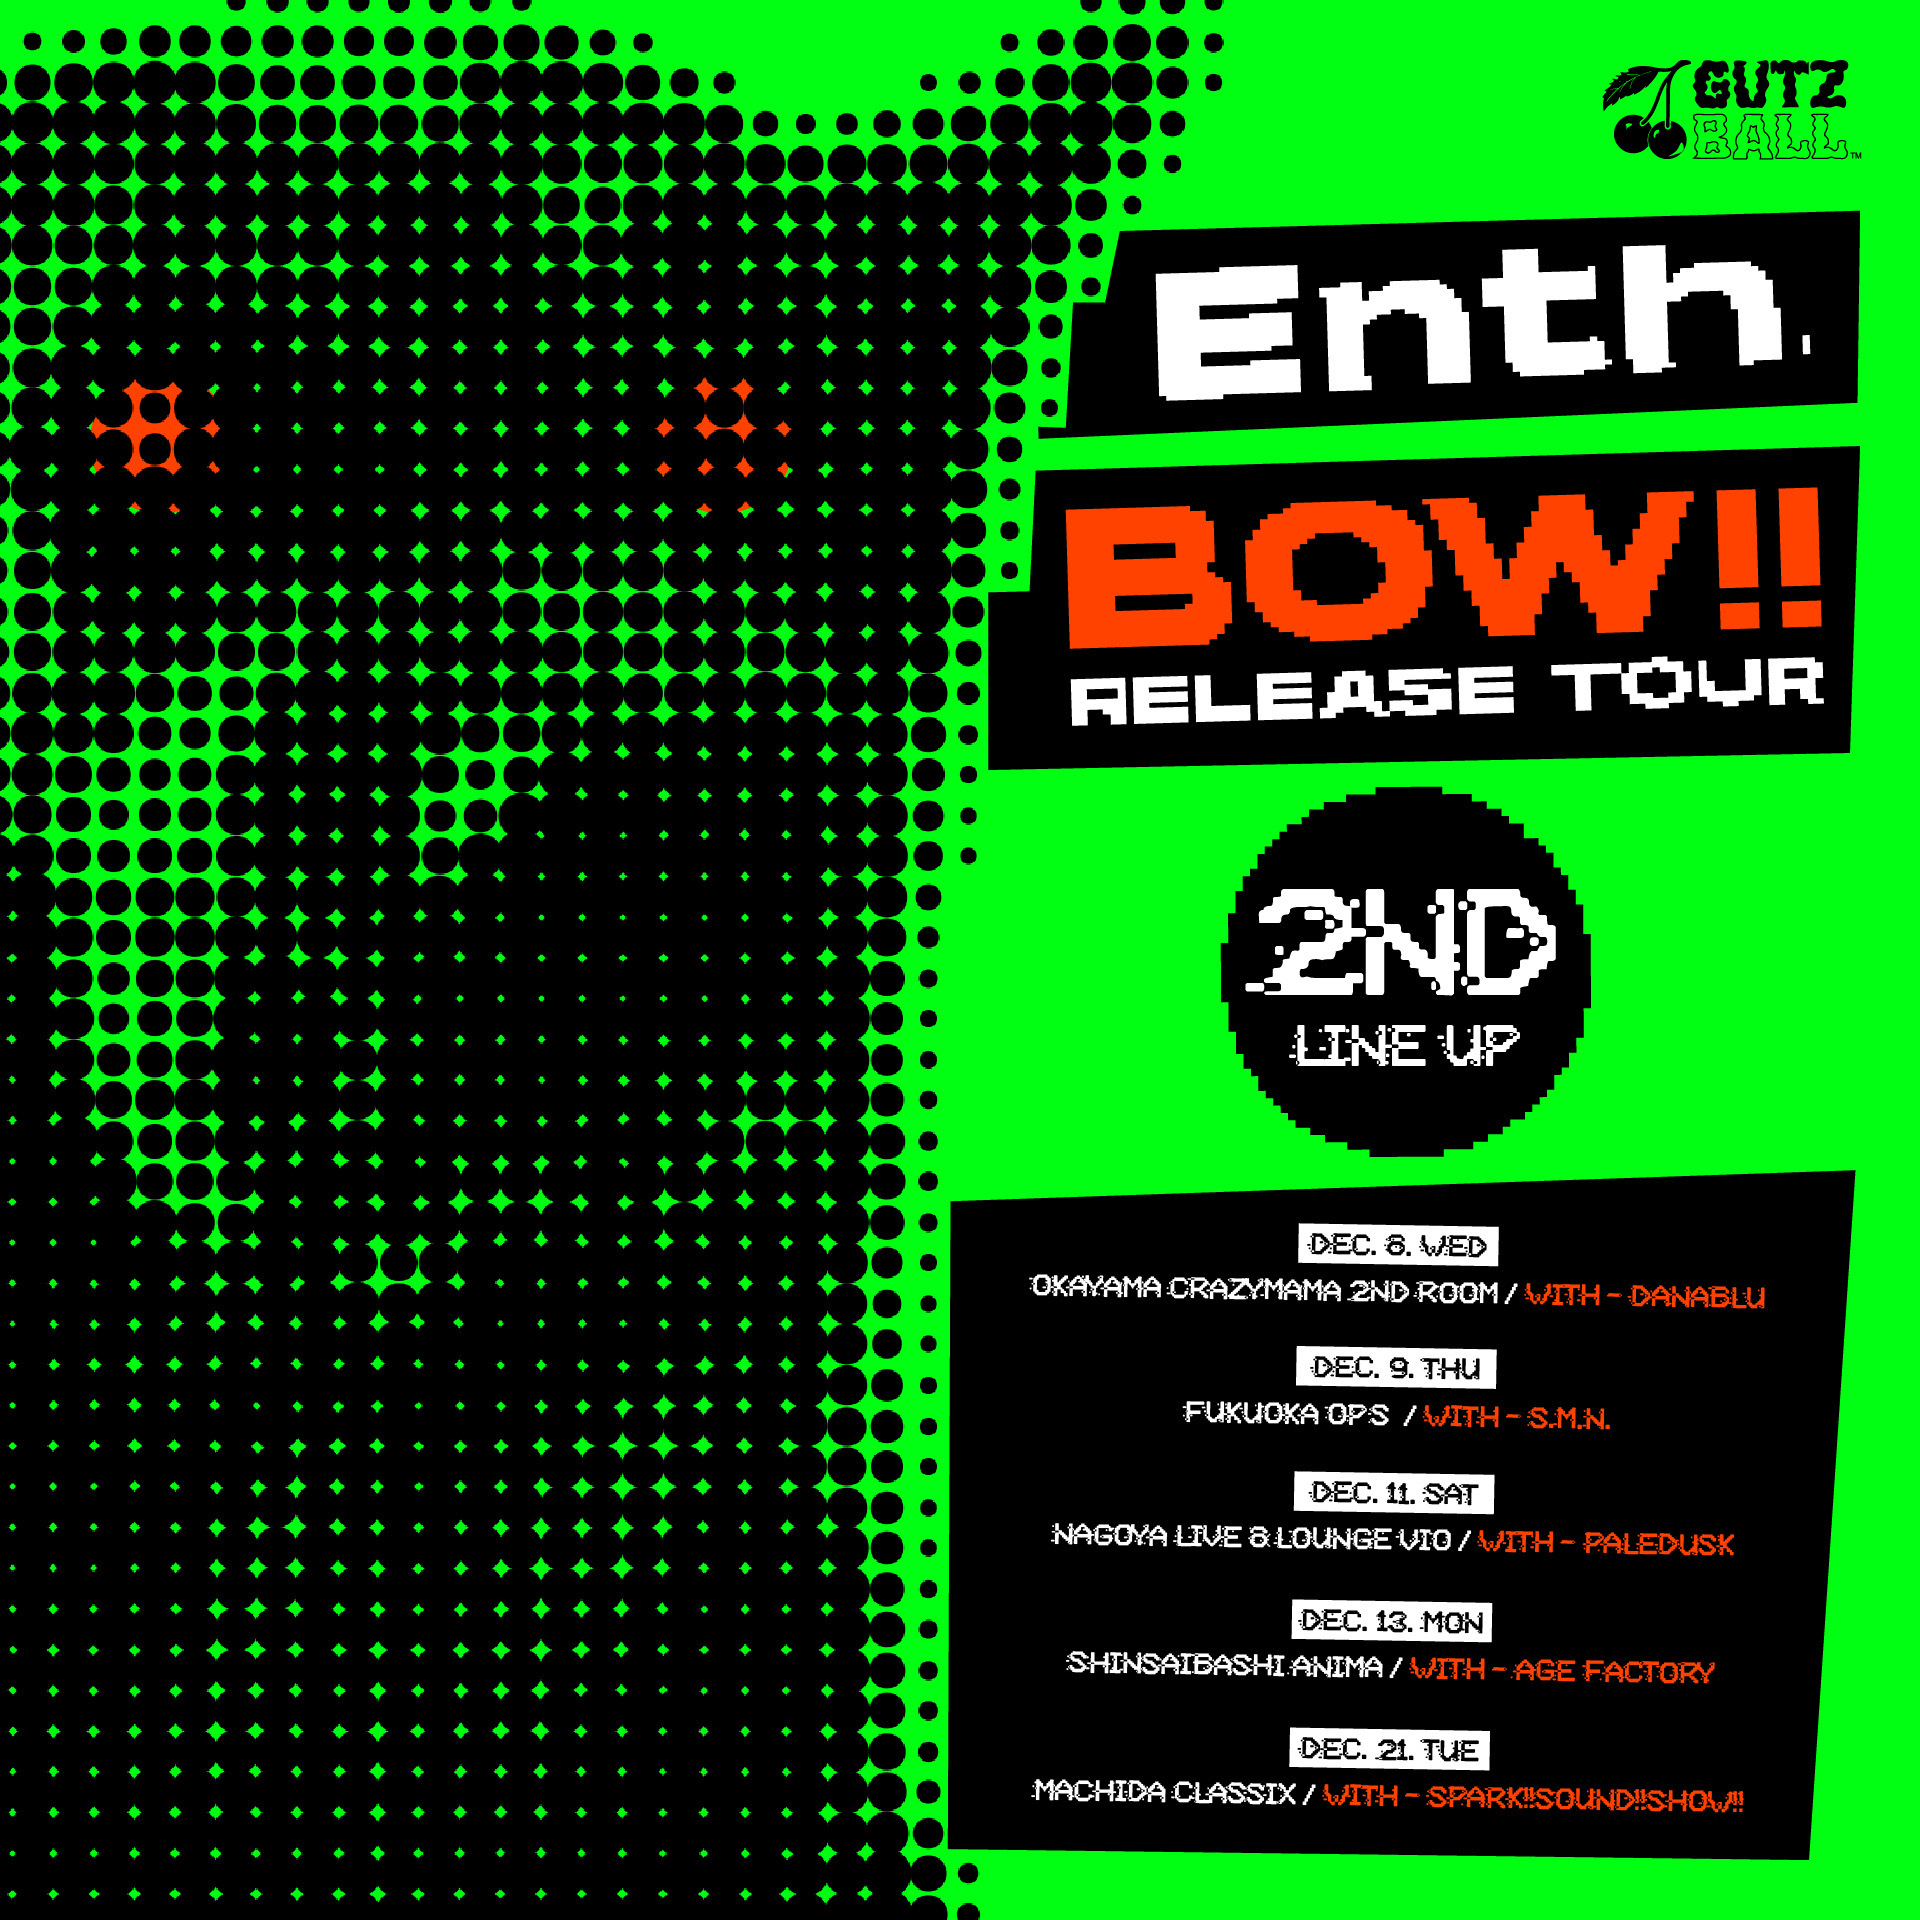 『RELEASE TOUR ENTH presents. BOW!! RELEASE TOUR』フライヤー